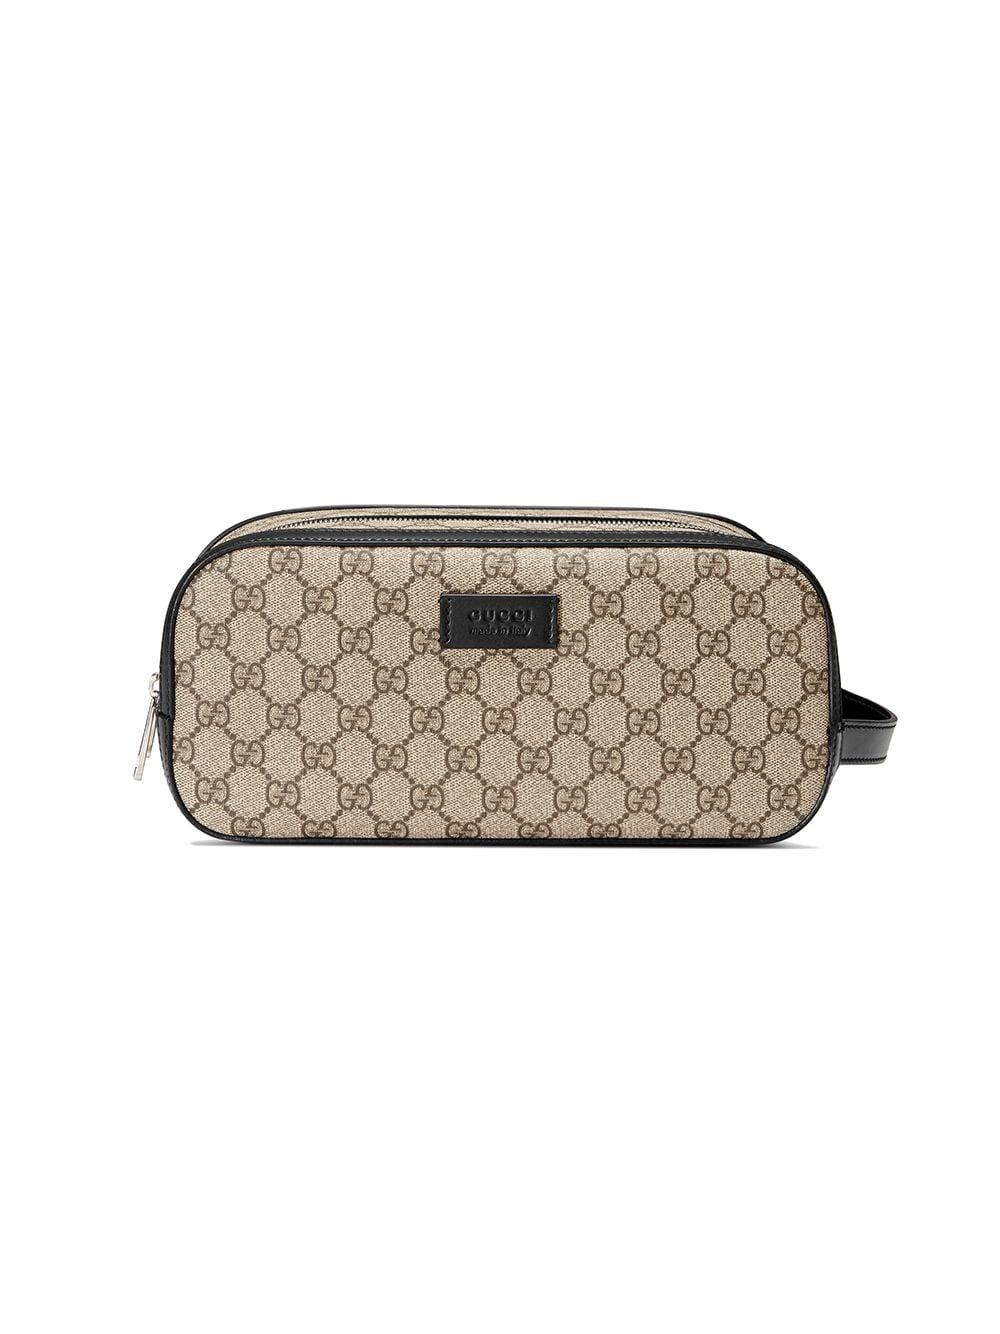 Gucci Gg Supreme Toiletry Bag in Natural